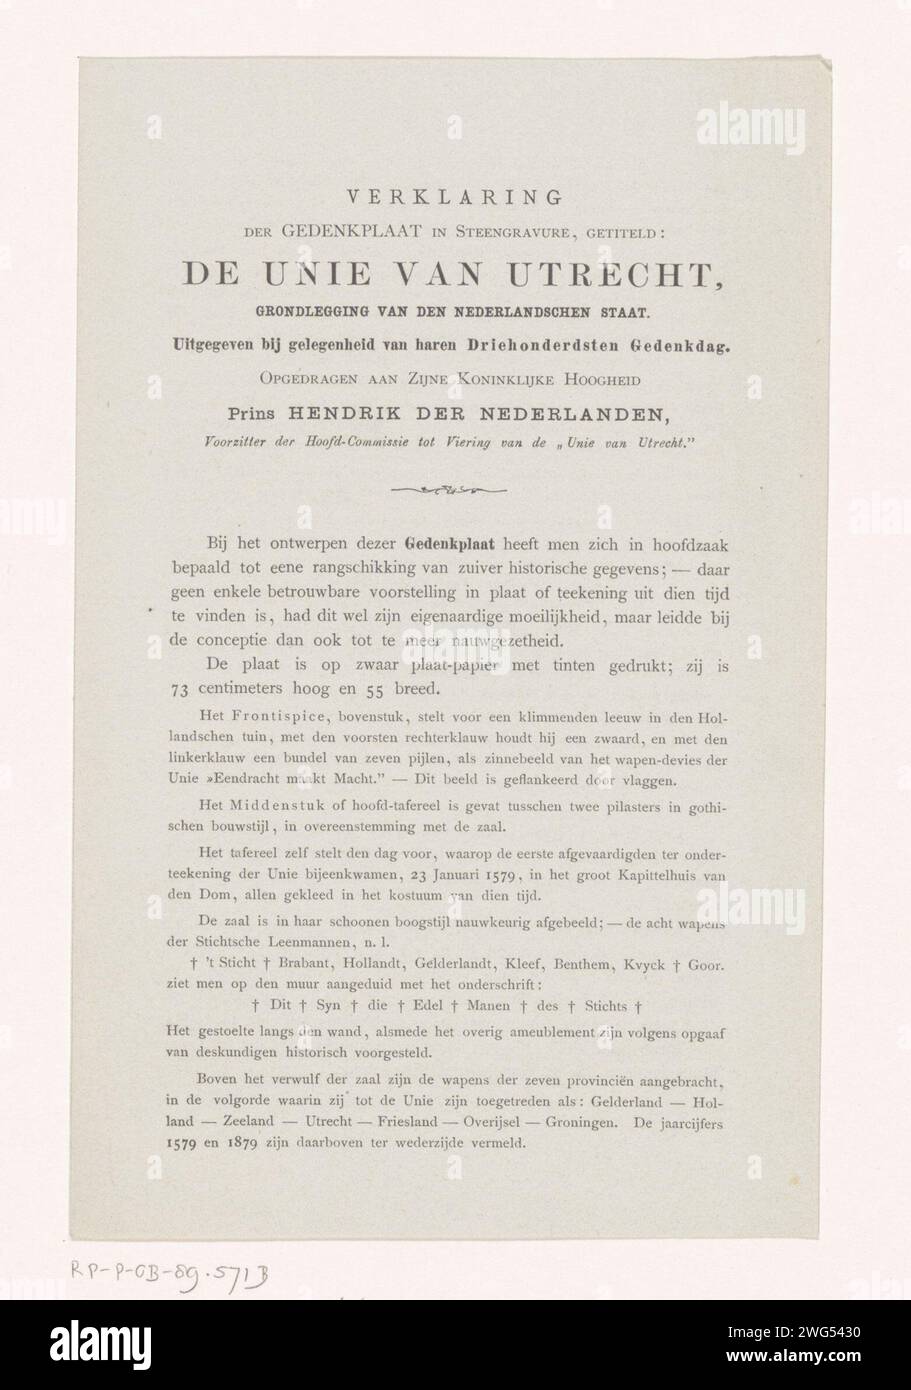 Declaration at the memorial print by 300-year commemoration of the Union of Utrecht 1579-1879, 1879 text sheet Declaration of the presentation of the Memorial print at the 300-year commemoration of the Union of Utrecht 1579 on January 29, 1879. Double-folded leaves printed on all four sides. Utrecht paper letterpress printing alliance, league, union, foedus Stock Photo